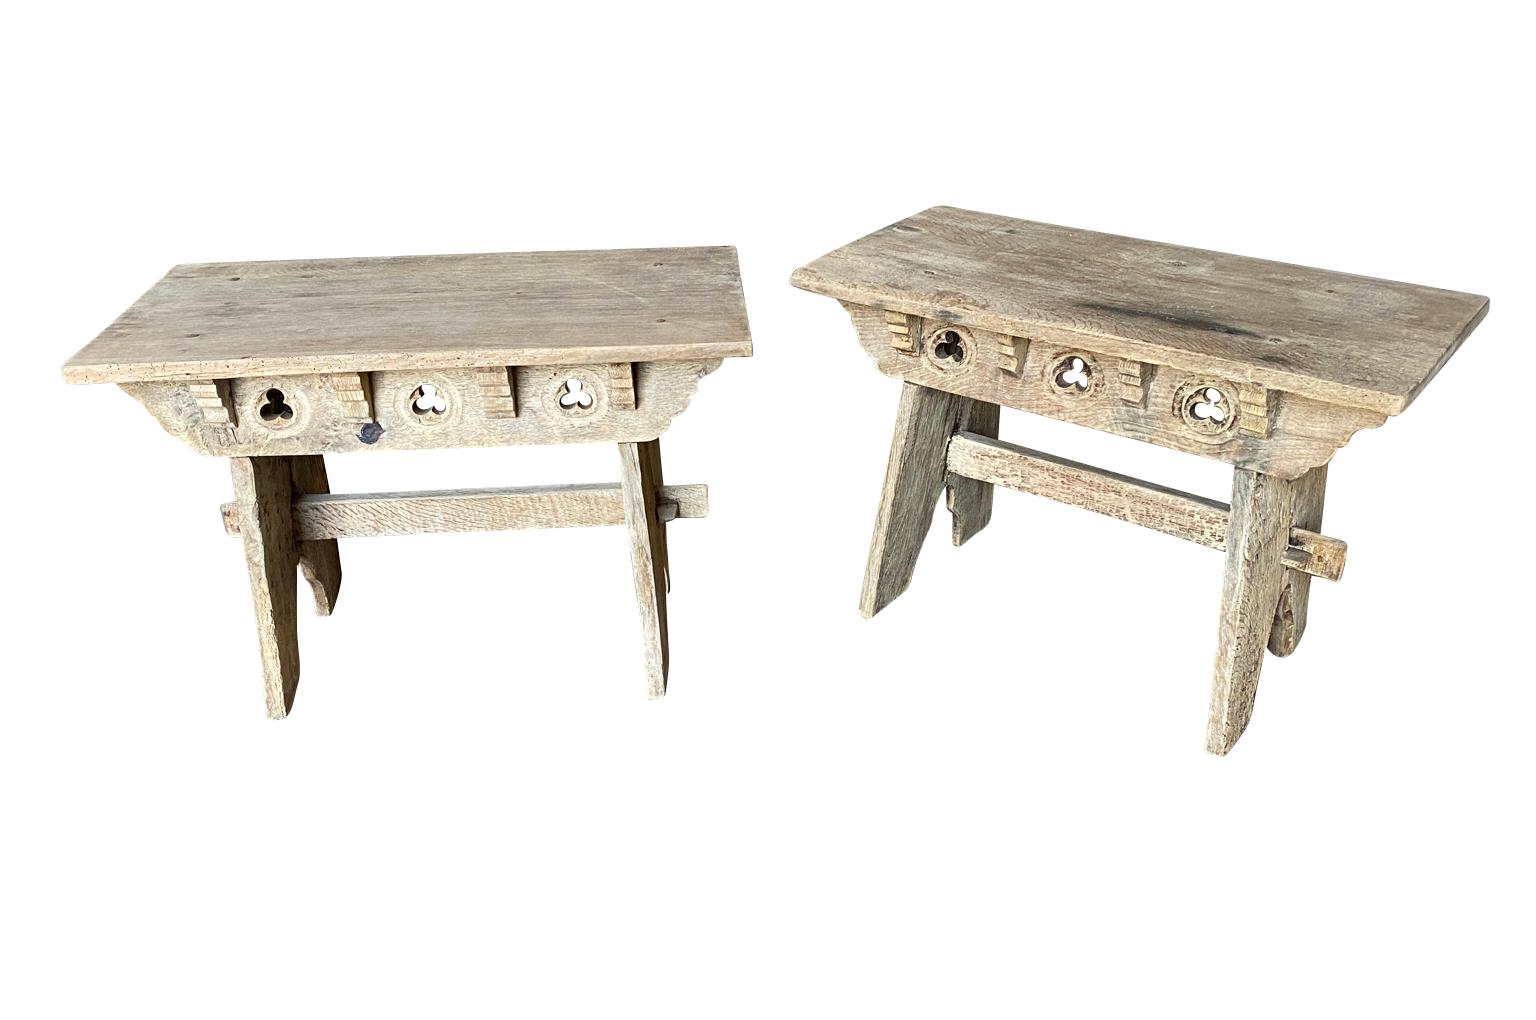 A charming pair of rustic Low Tables - Benches from the Catalan region of France.  Nicely constructed from oak each with trefoil motifs.